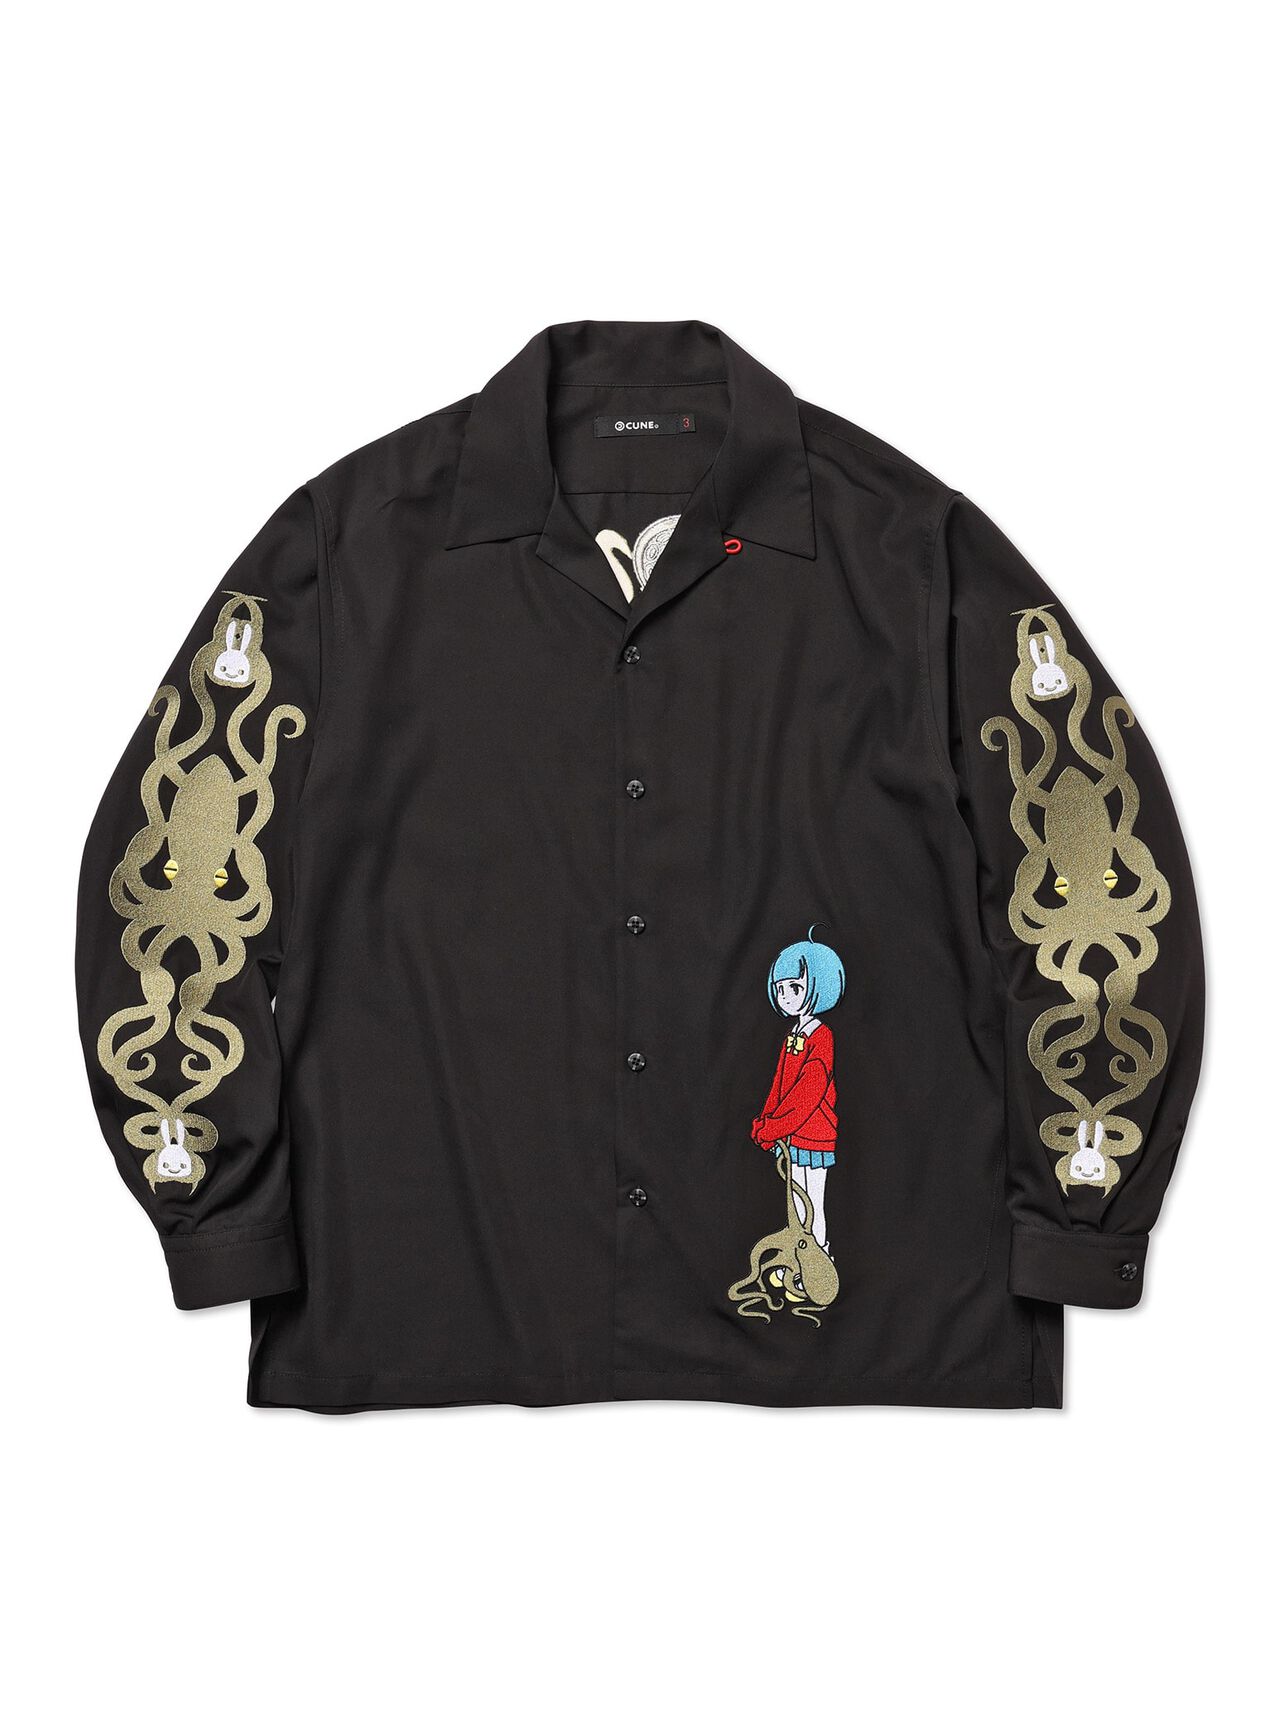 Long-sleeved open-collared shirt with embroidery of a sea cucumber and human,, large image number 1